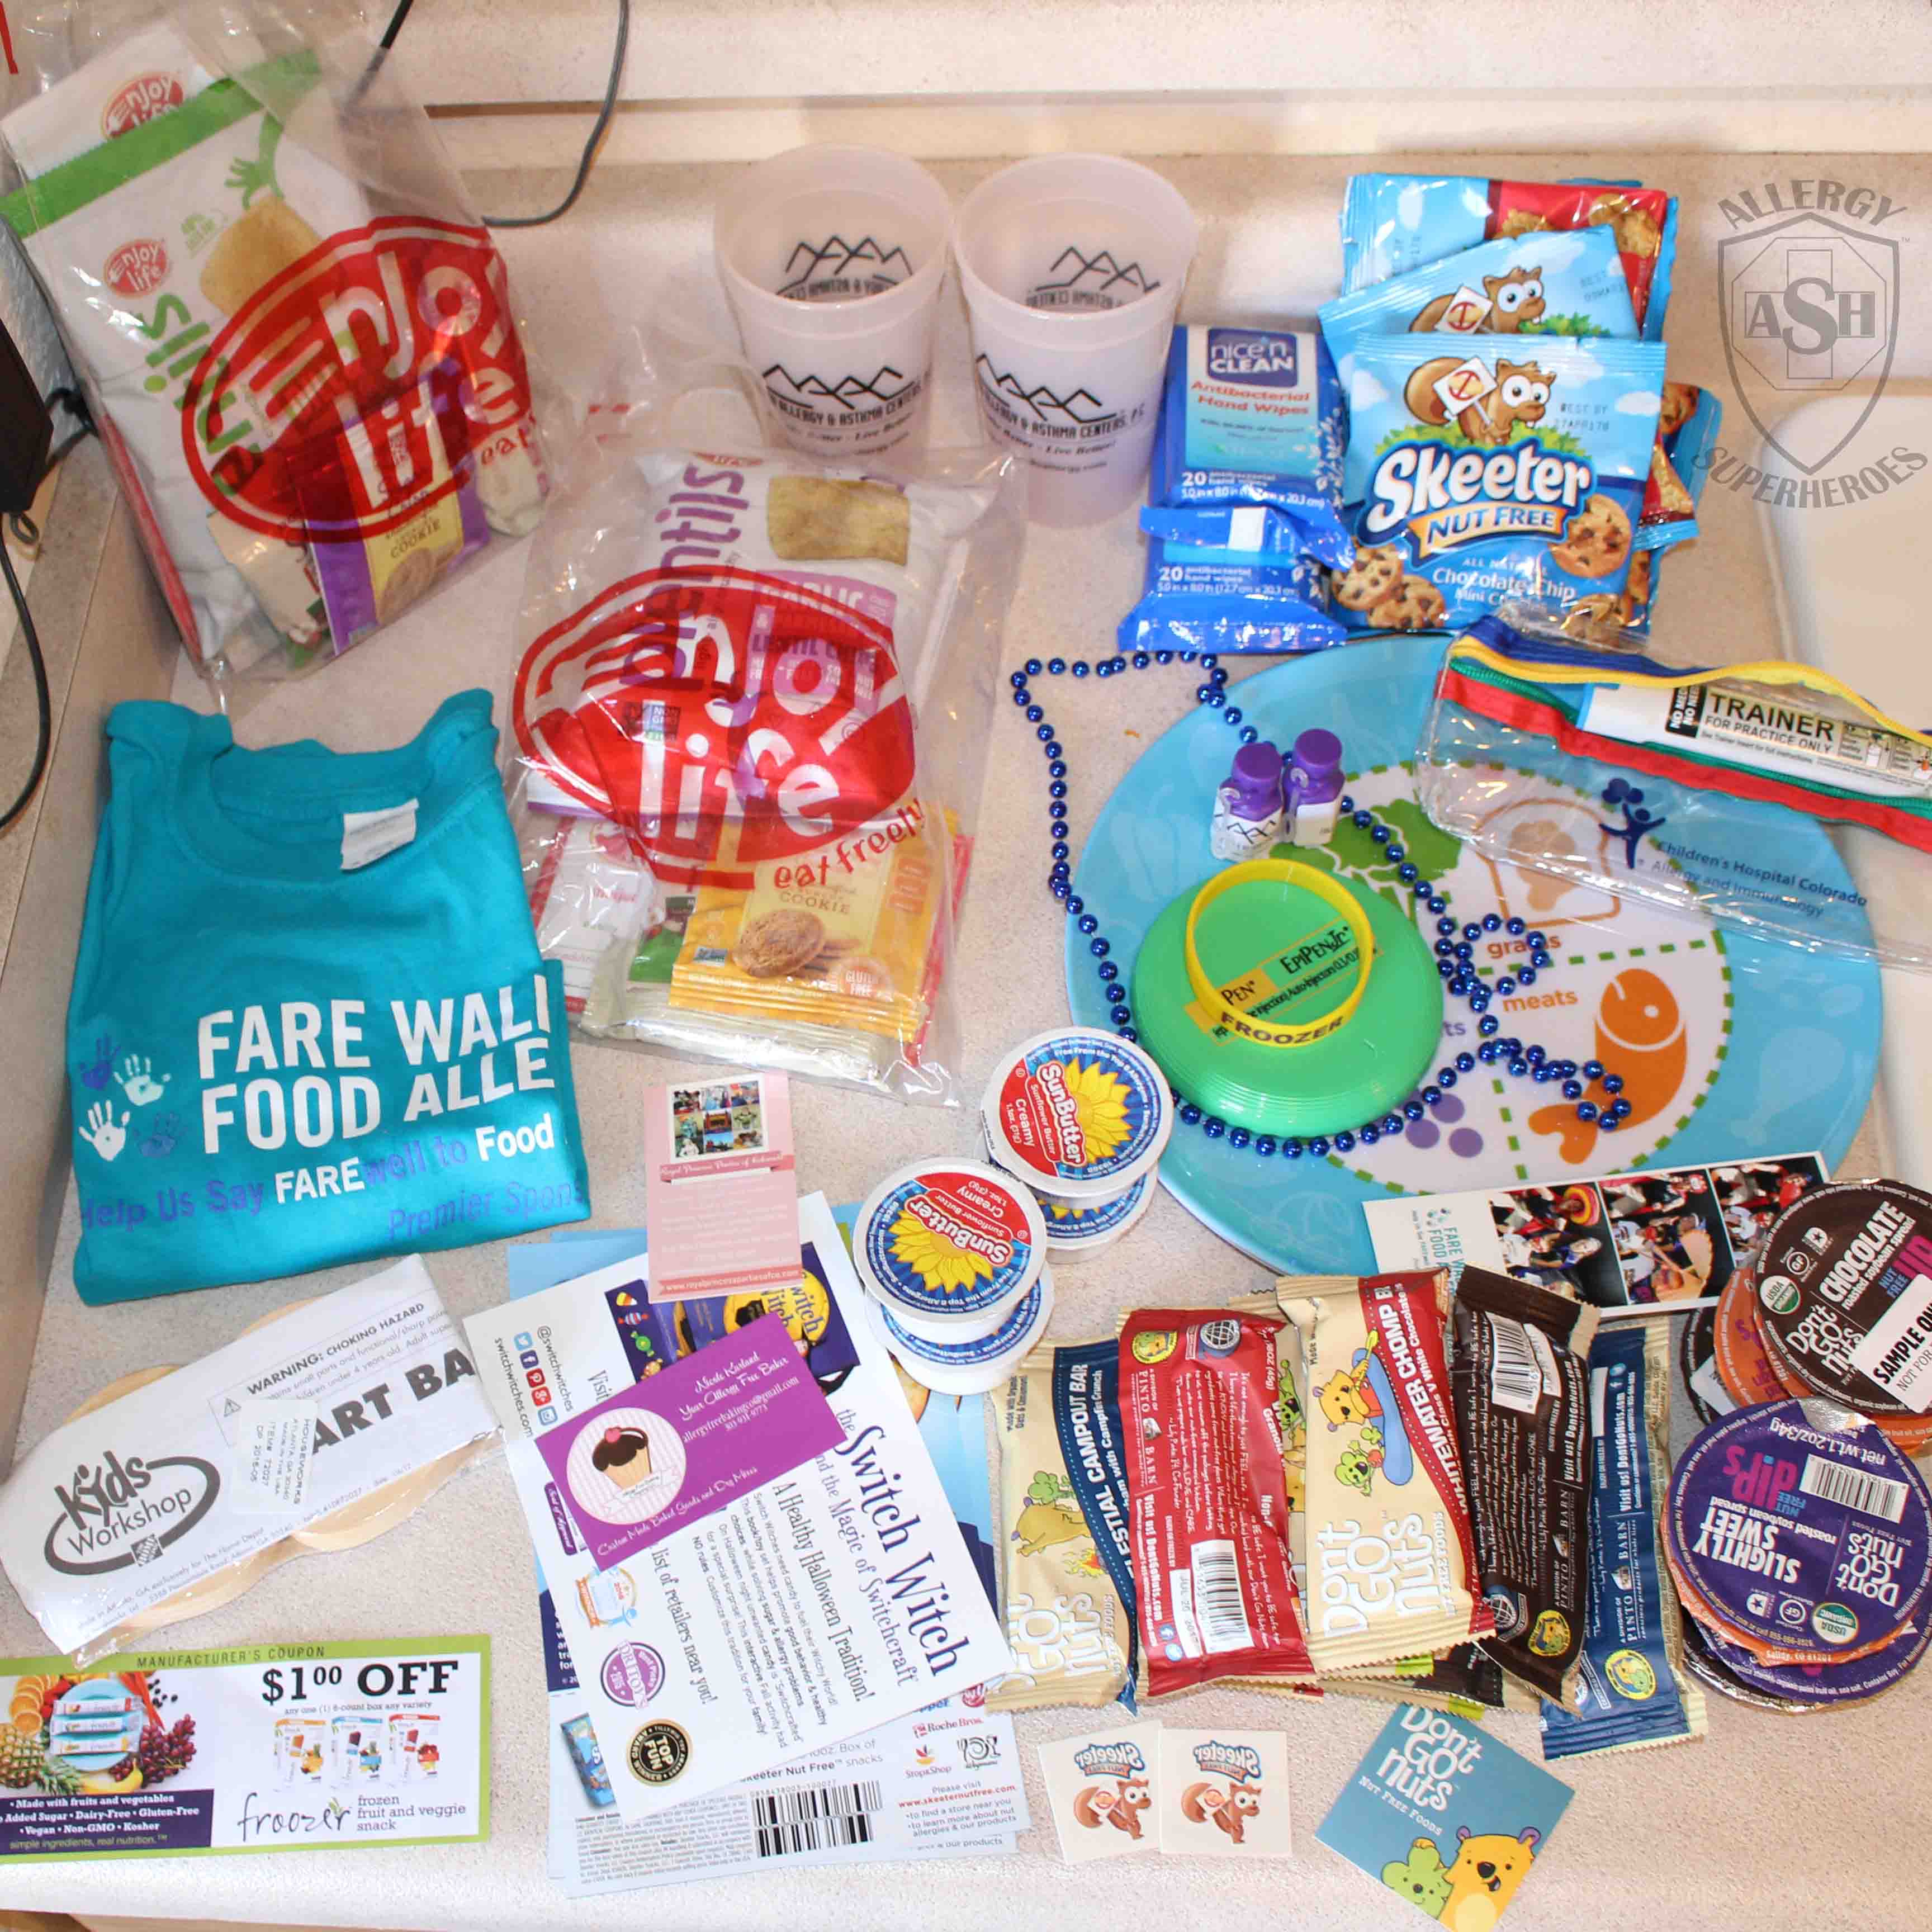 Swag from the FARE Walk | Team Allergy Superheroes at the 2016 FARE Walk for Food Allergy